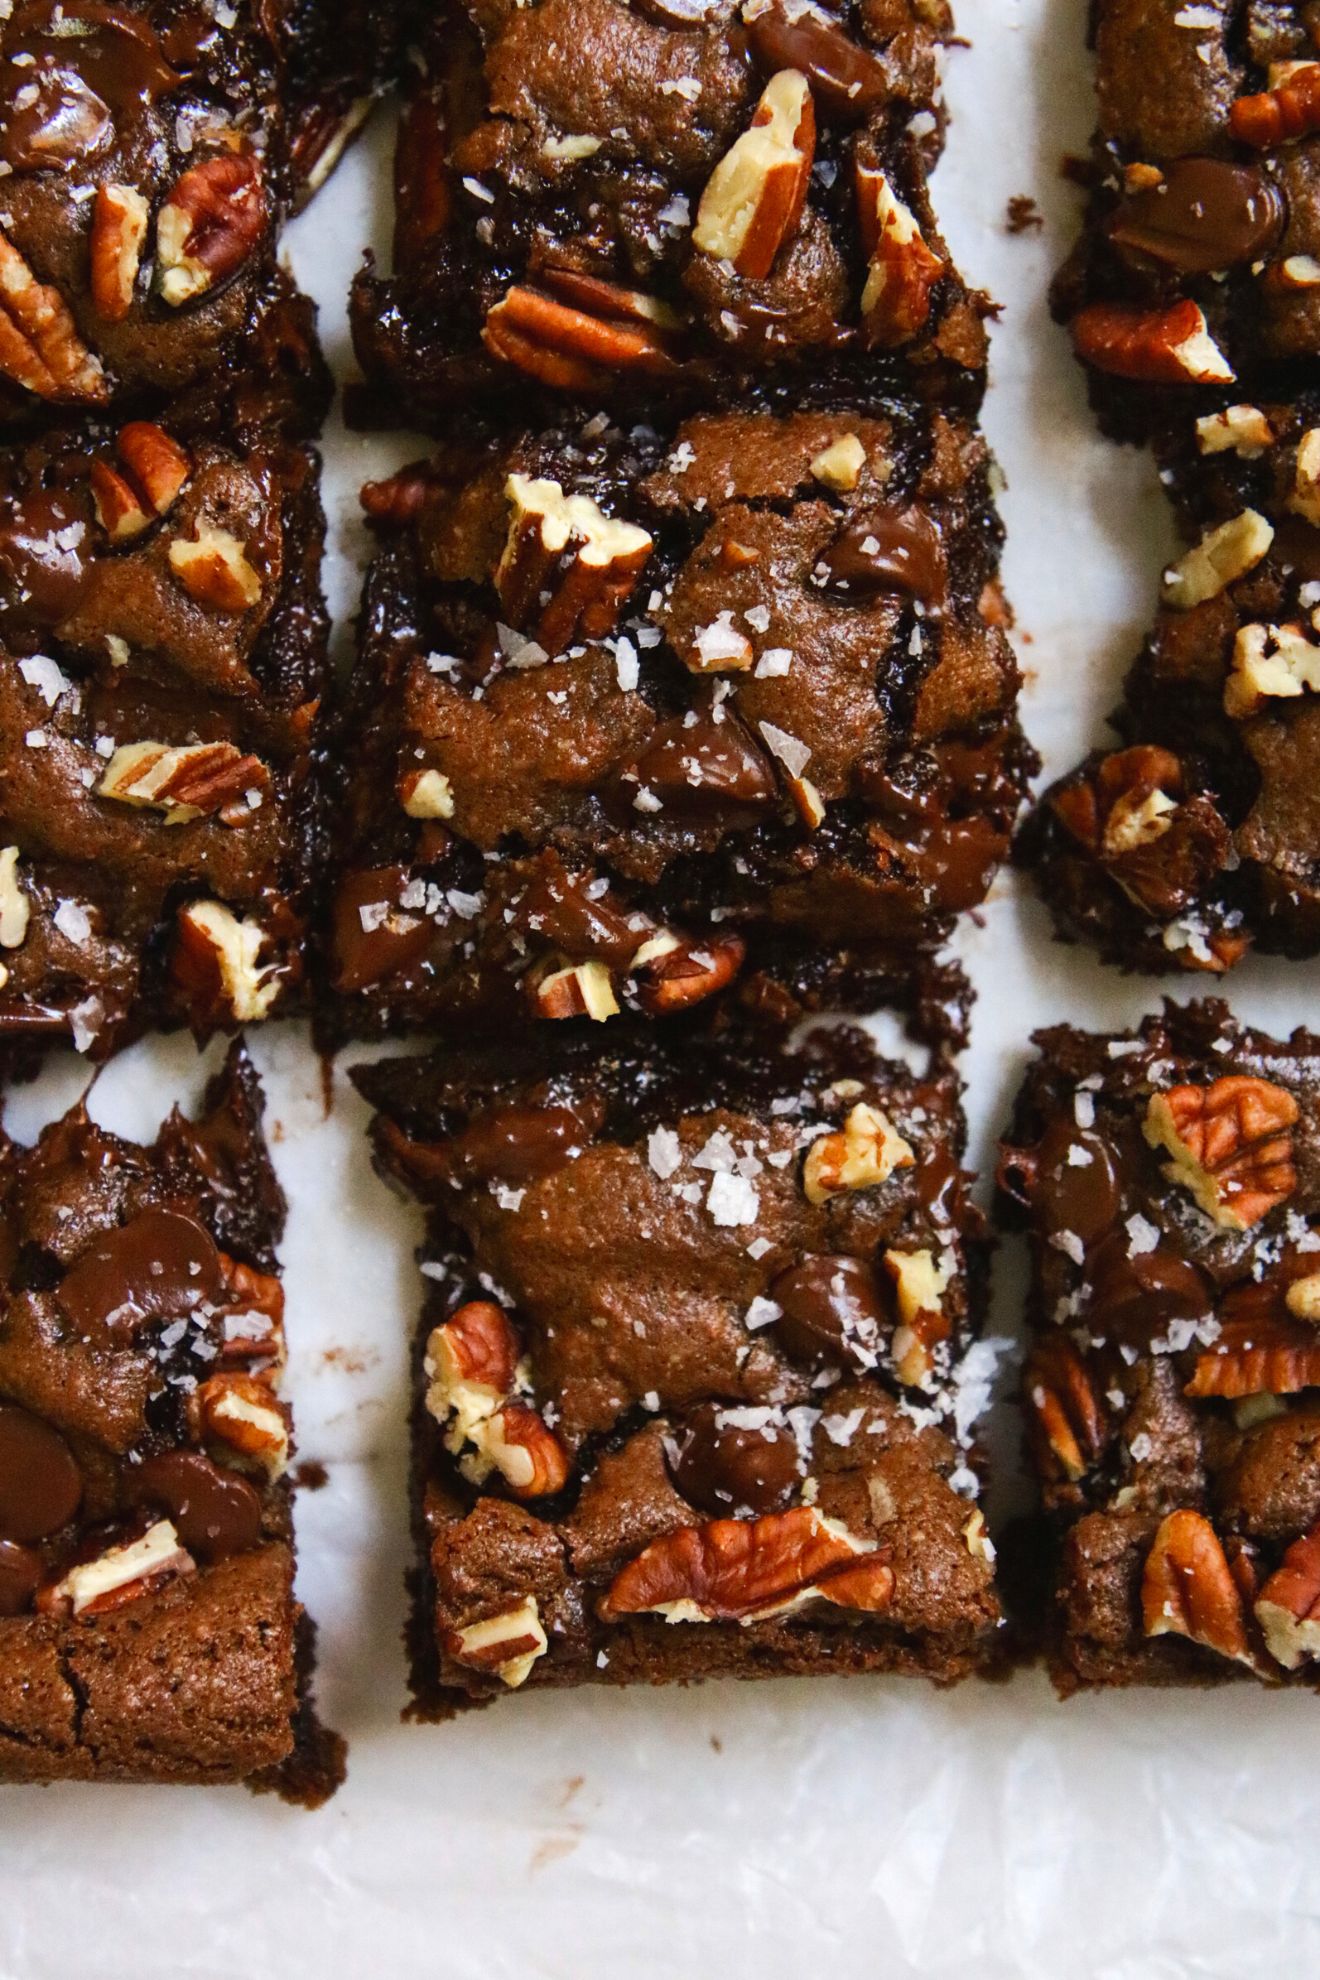 This is an overhead image of gooey brownies cut into squares. The brownies are topped with pecans and flakey salt. They sit on a white surface.